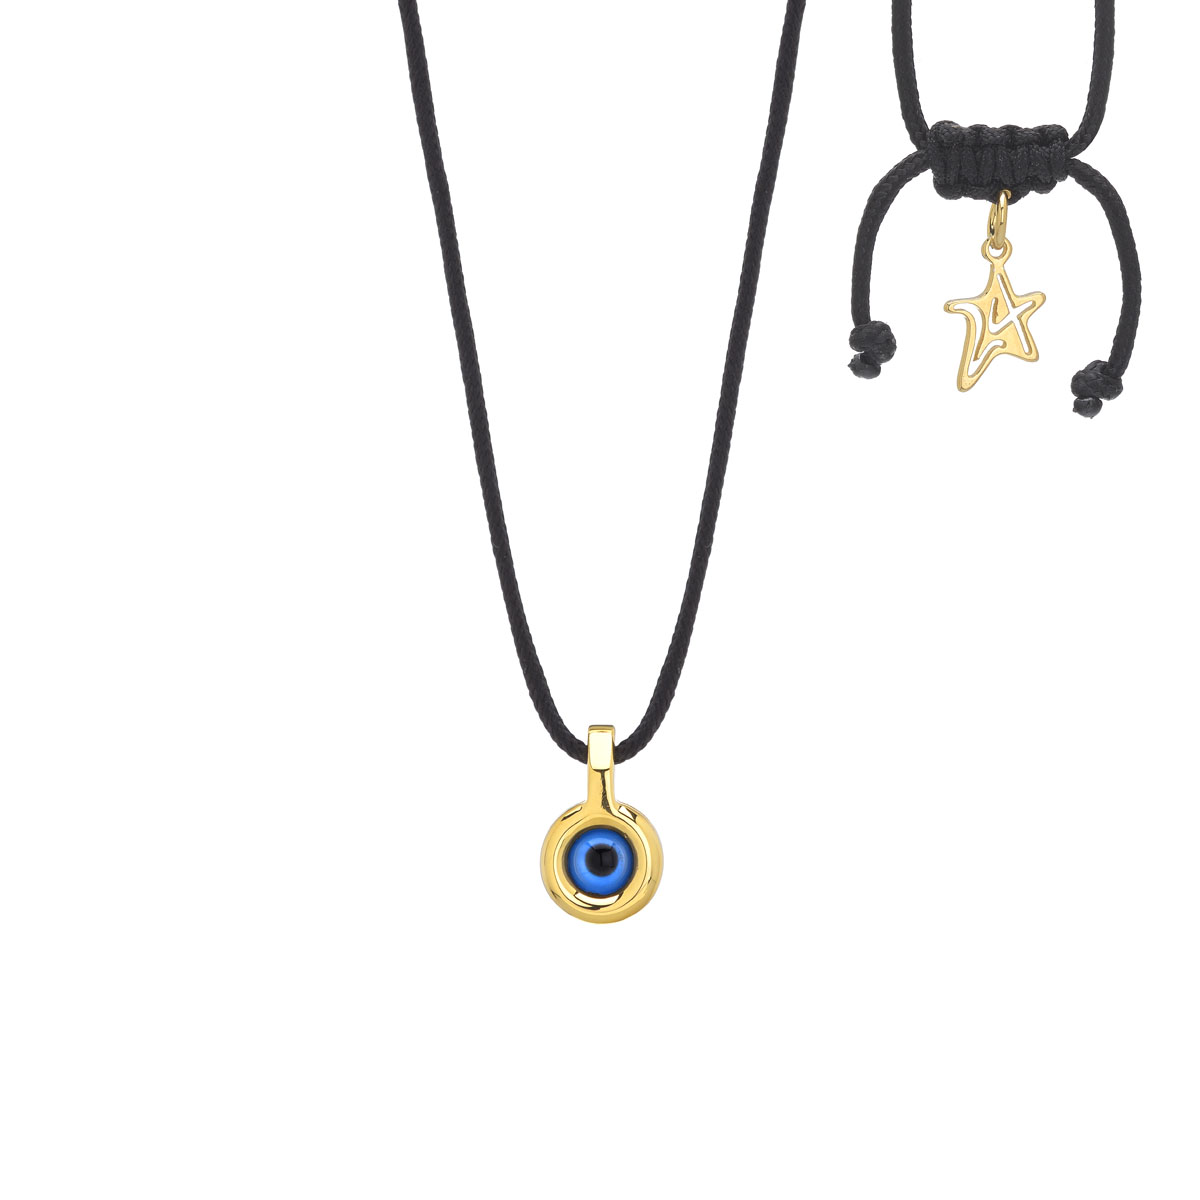 CaratLane: A Tanishq Partnership - A sight to behold, this Evil Eye Bracelet  is here to make a style statement 💁🏻‍♀️ Make it yours -  https://bit.ly/3AexpiW | Facebook